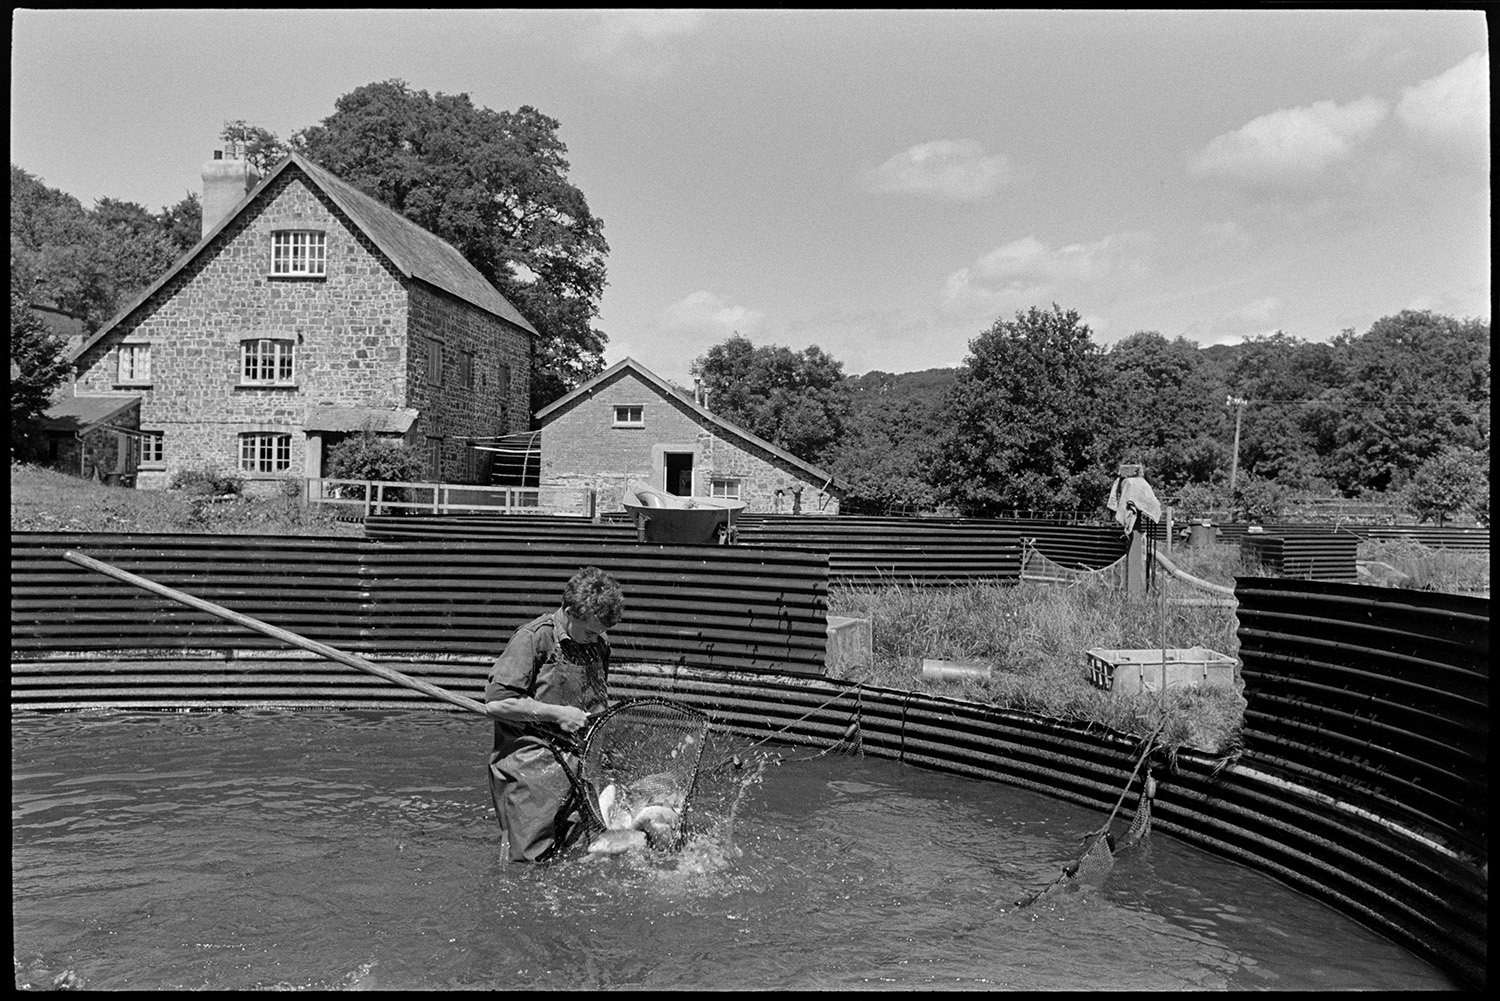 Catching fish at fish farm ponds. 
[A man catching fish with a large net in a circular pond with corrugated iron sides at a fish farm at Head Mill, Kings Nympton. The farmhouse can be seen in the background.]